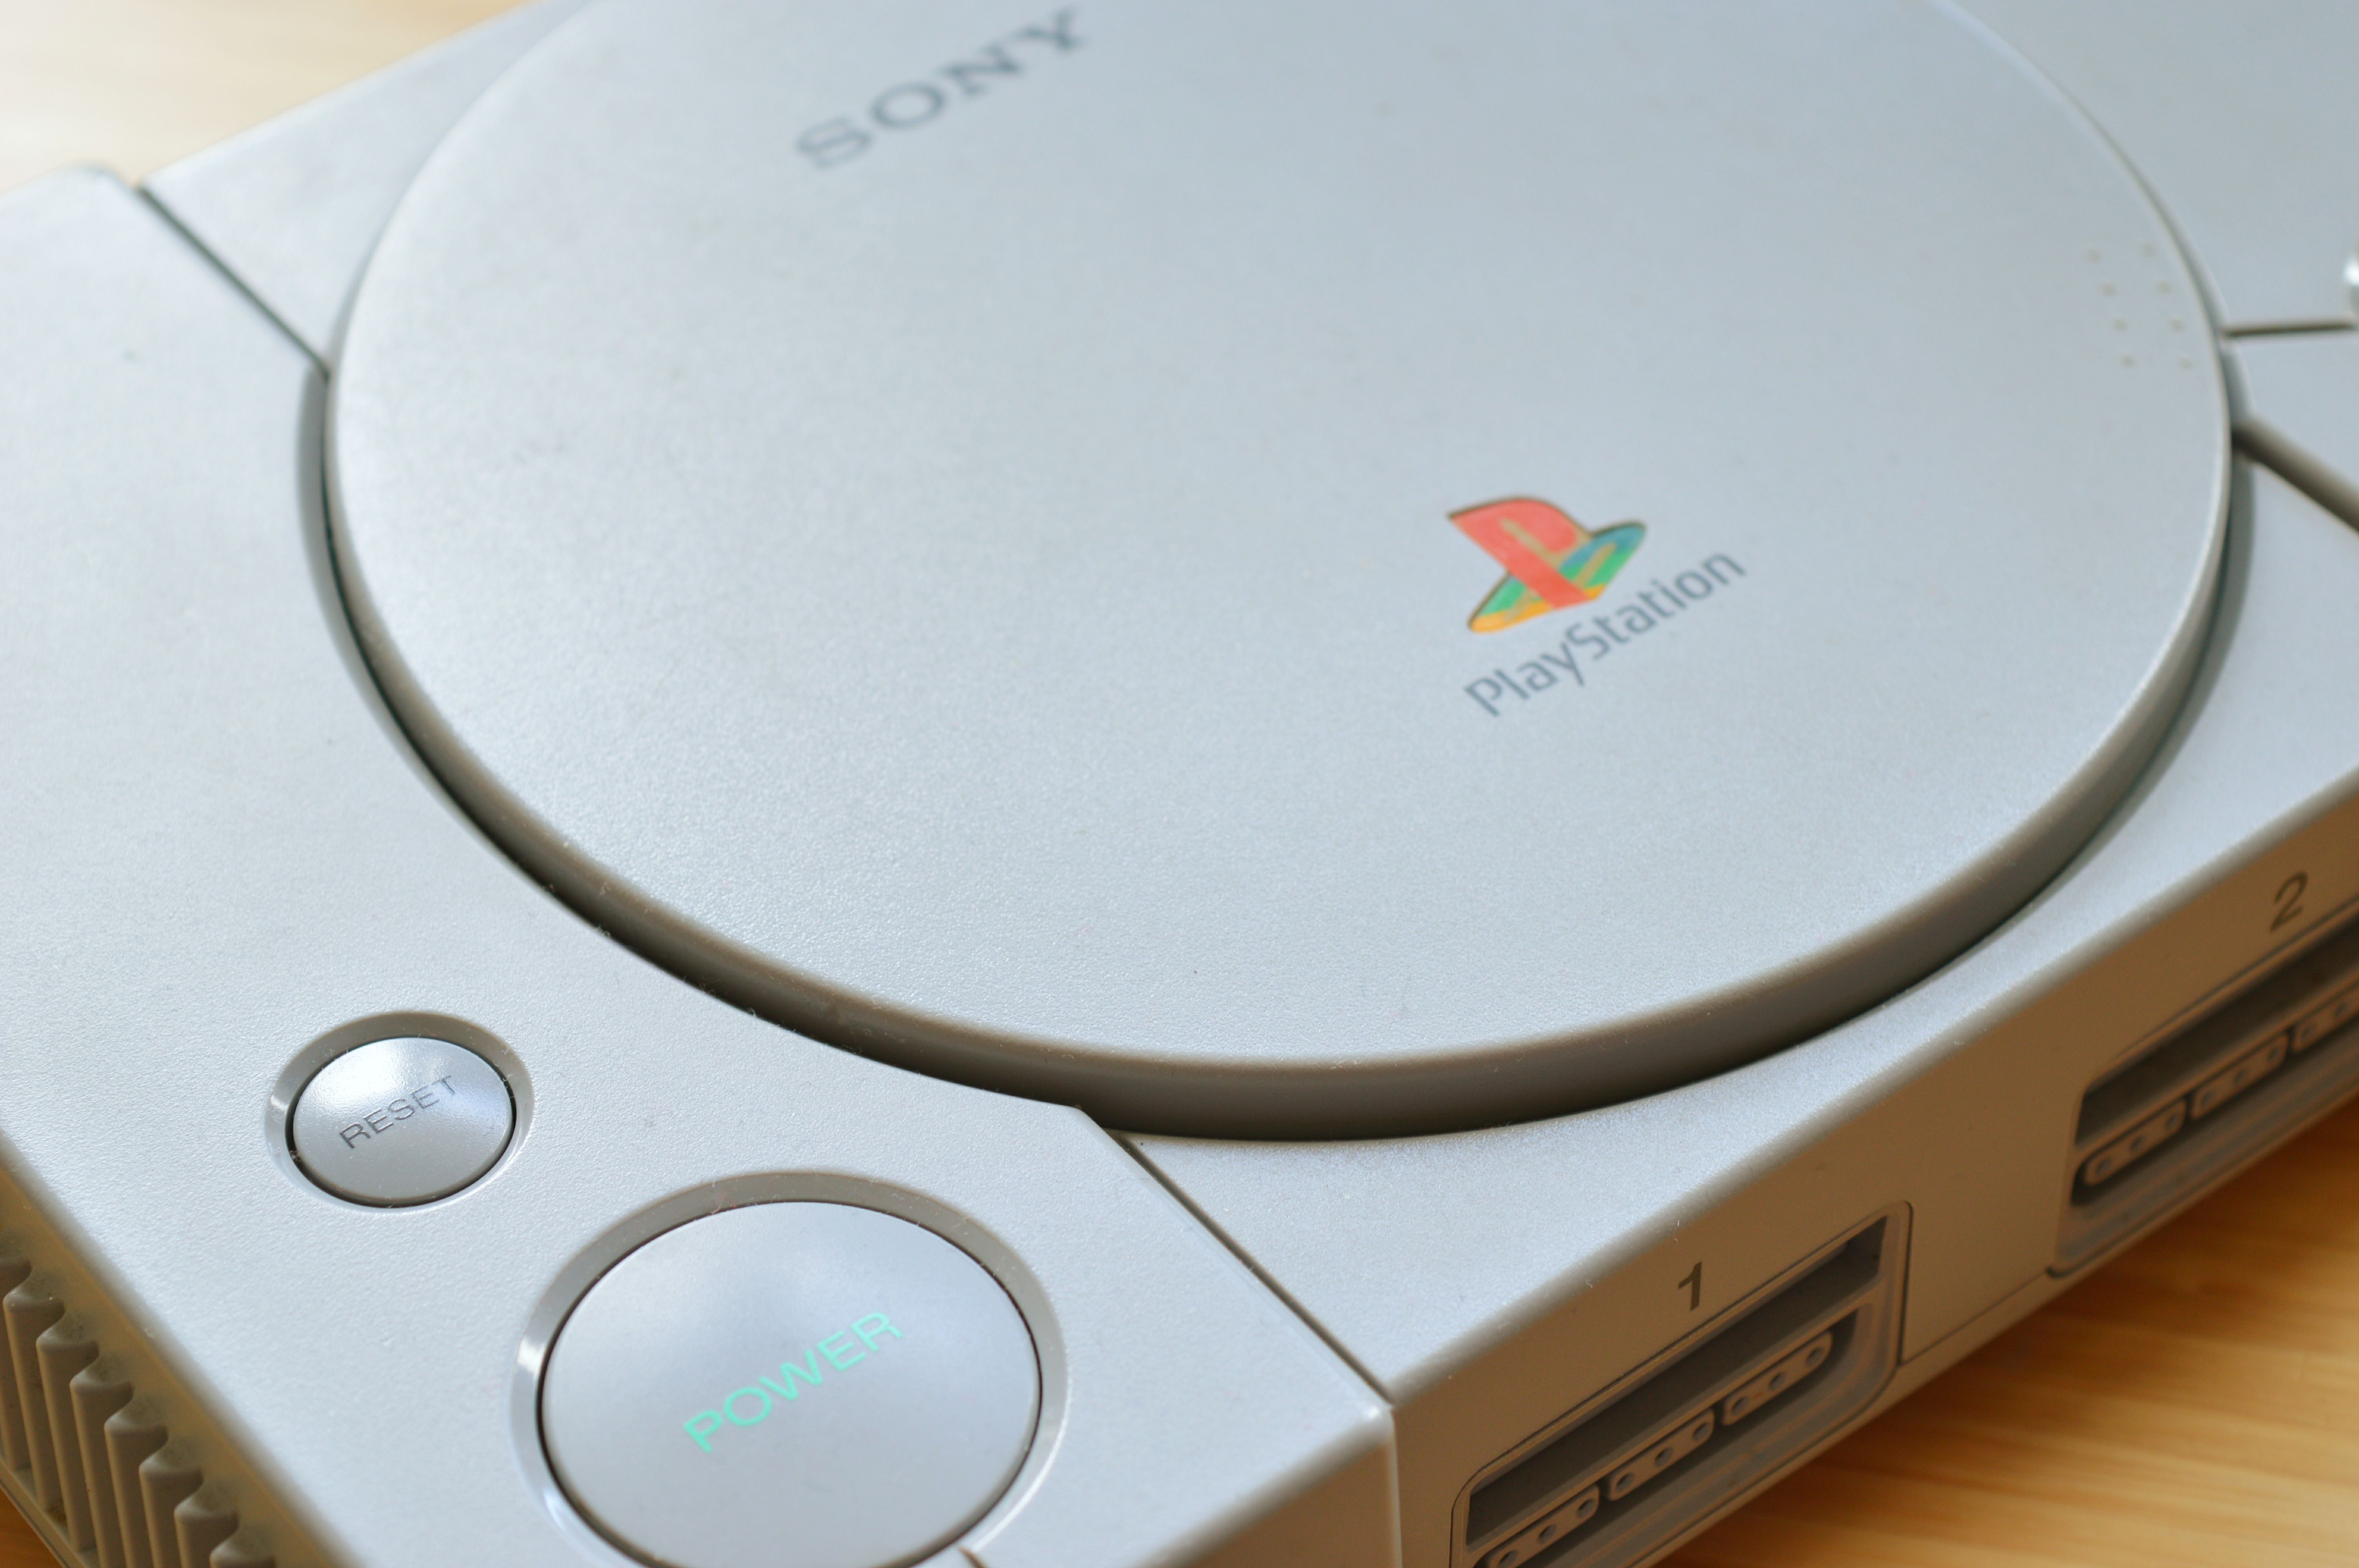 Sony Is Bringing Back The Original PlayStation Just In Time For Christmas